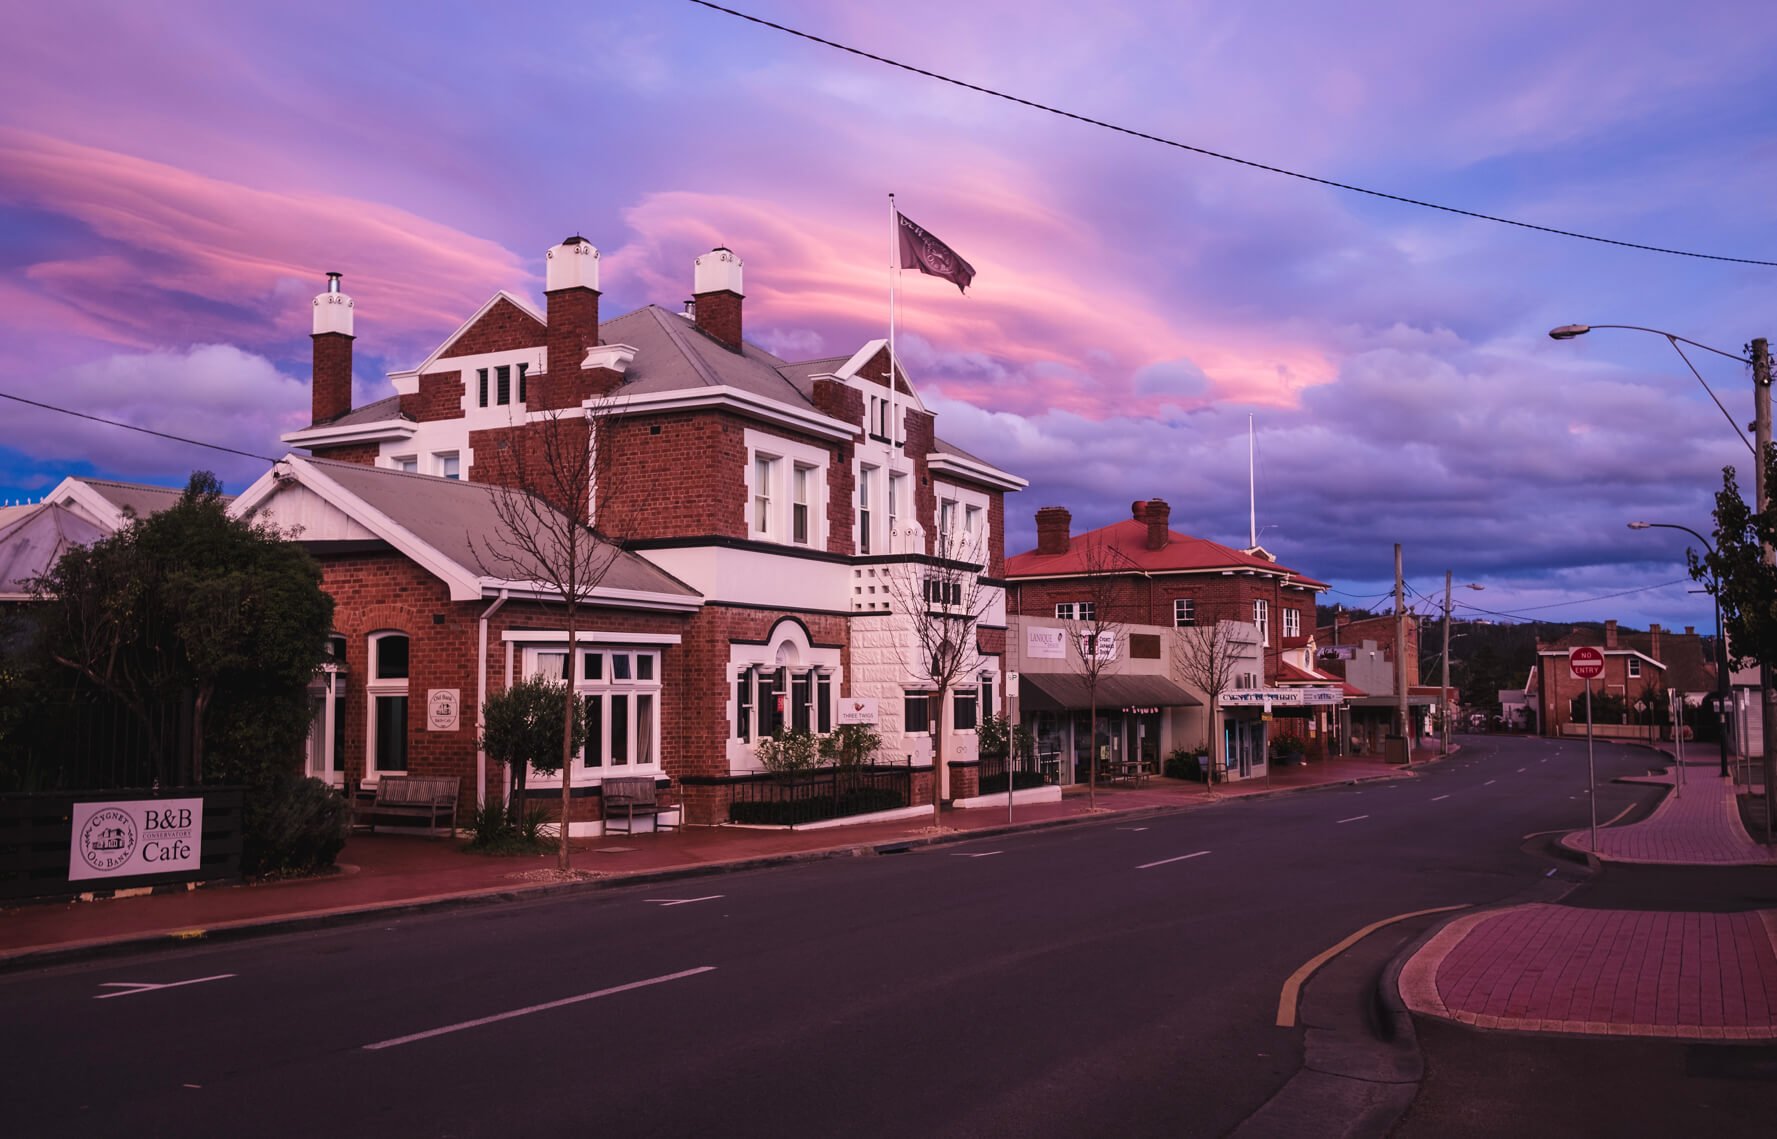 A vibrant sunset in the main street of Cygnet, a town in southern Tasmania